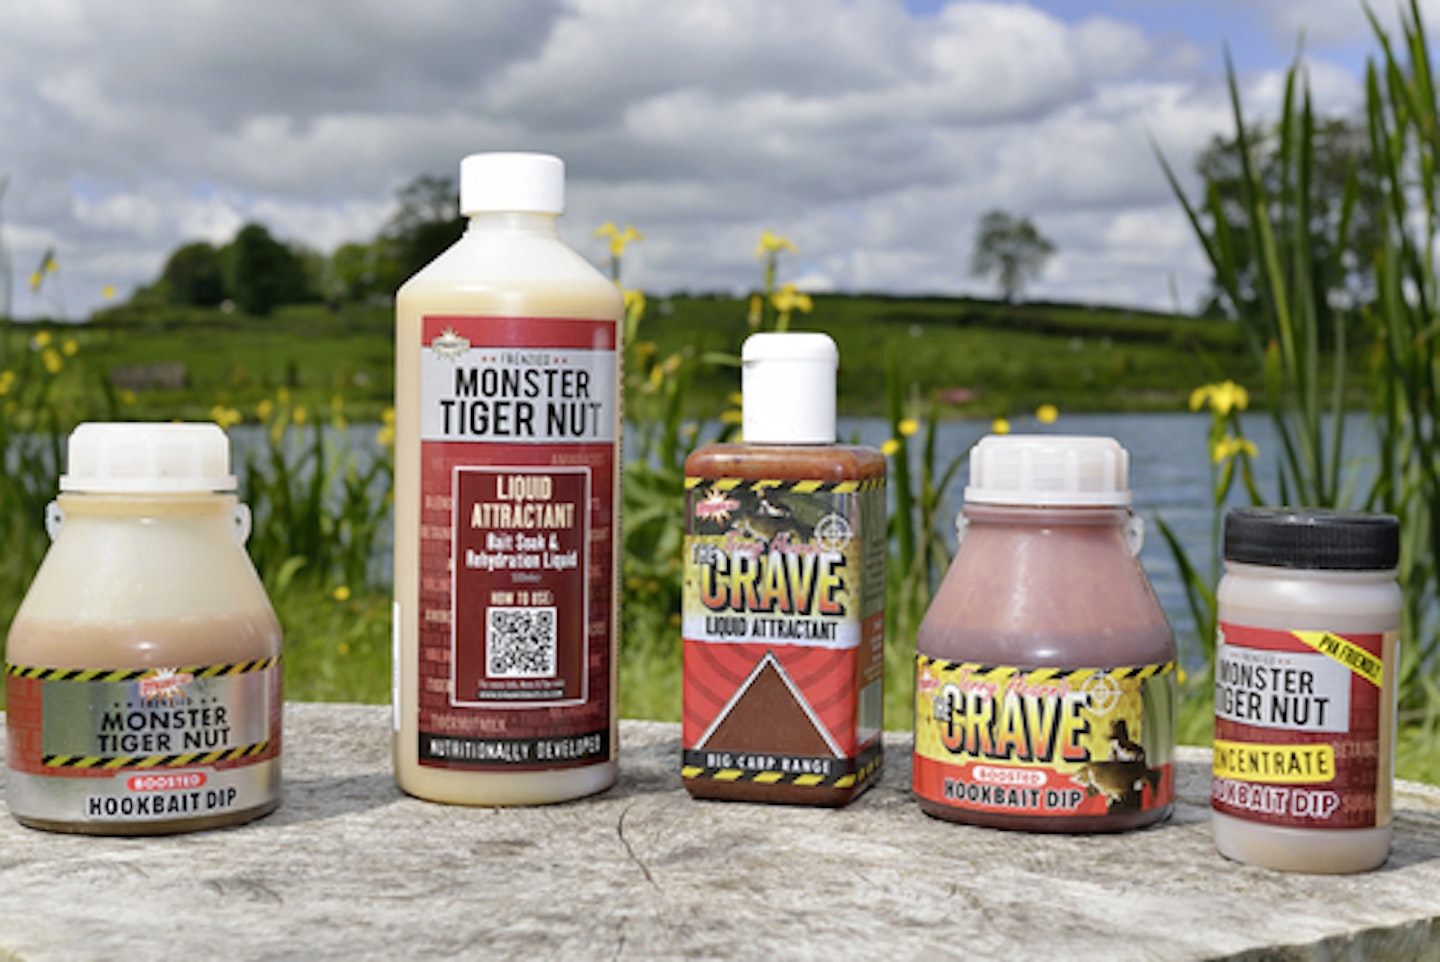 Adding a matching glug can really boost your boilie baits.